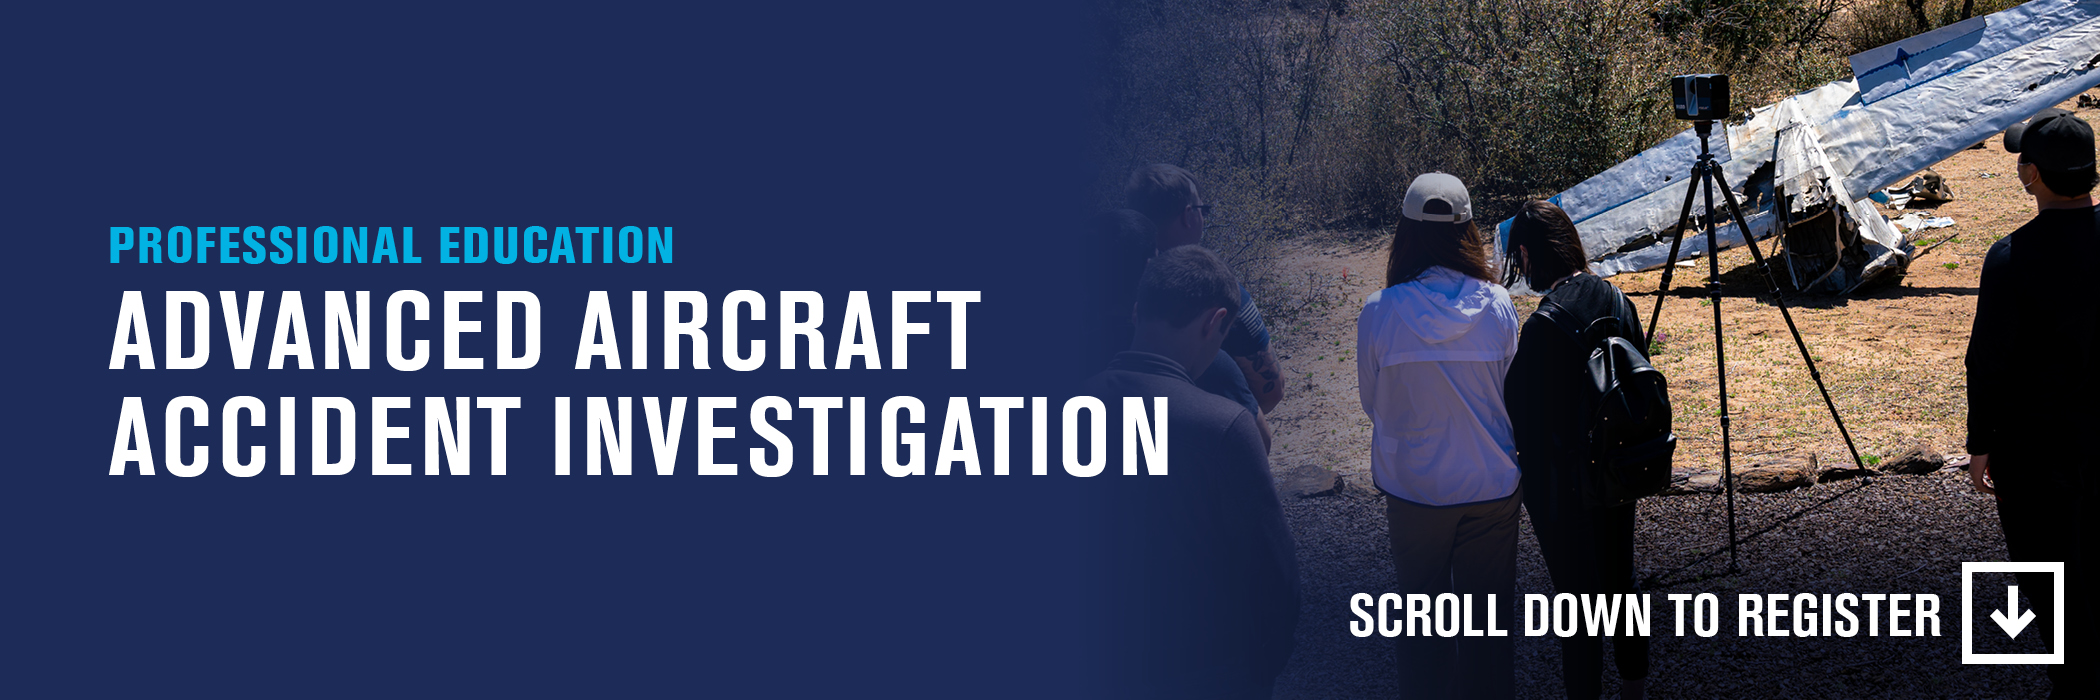 aircraft images and accident sites for learning investigation